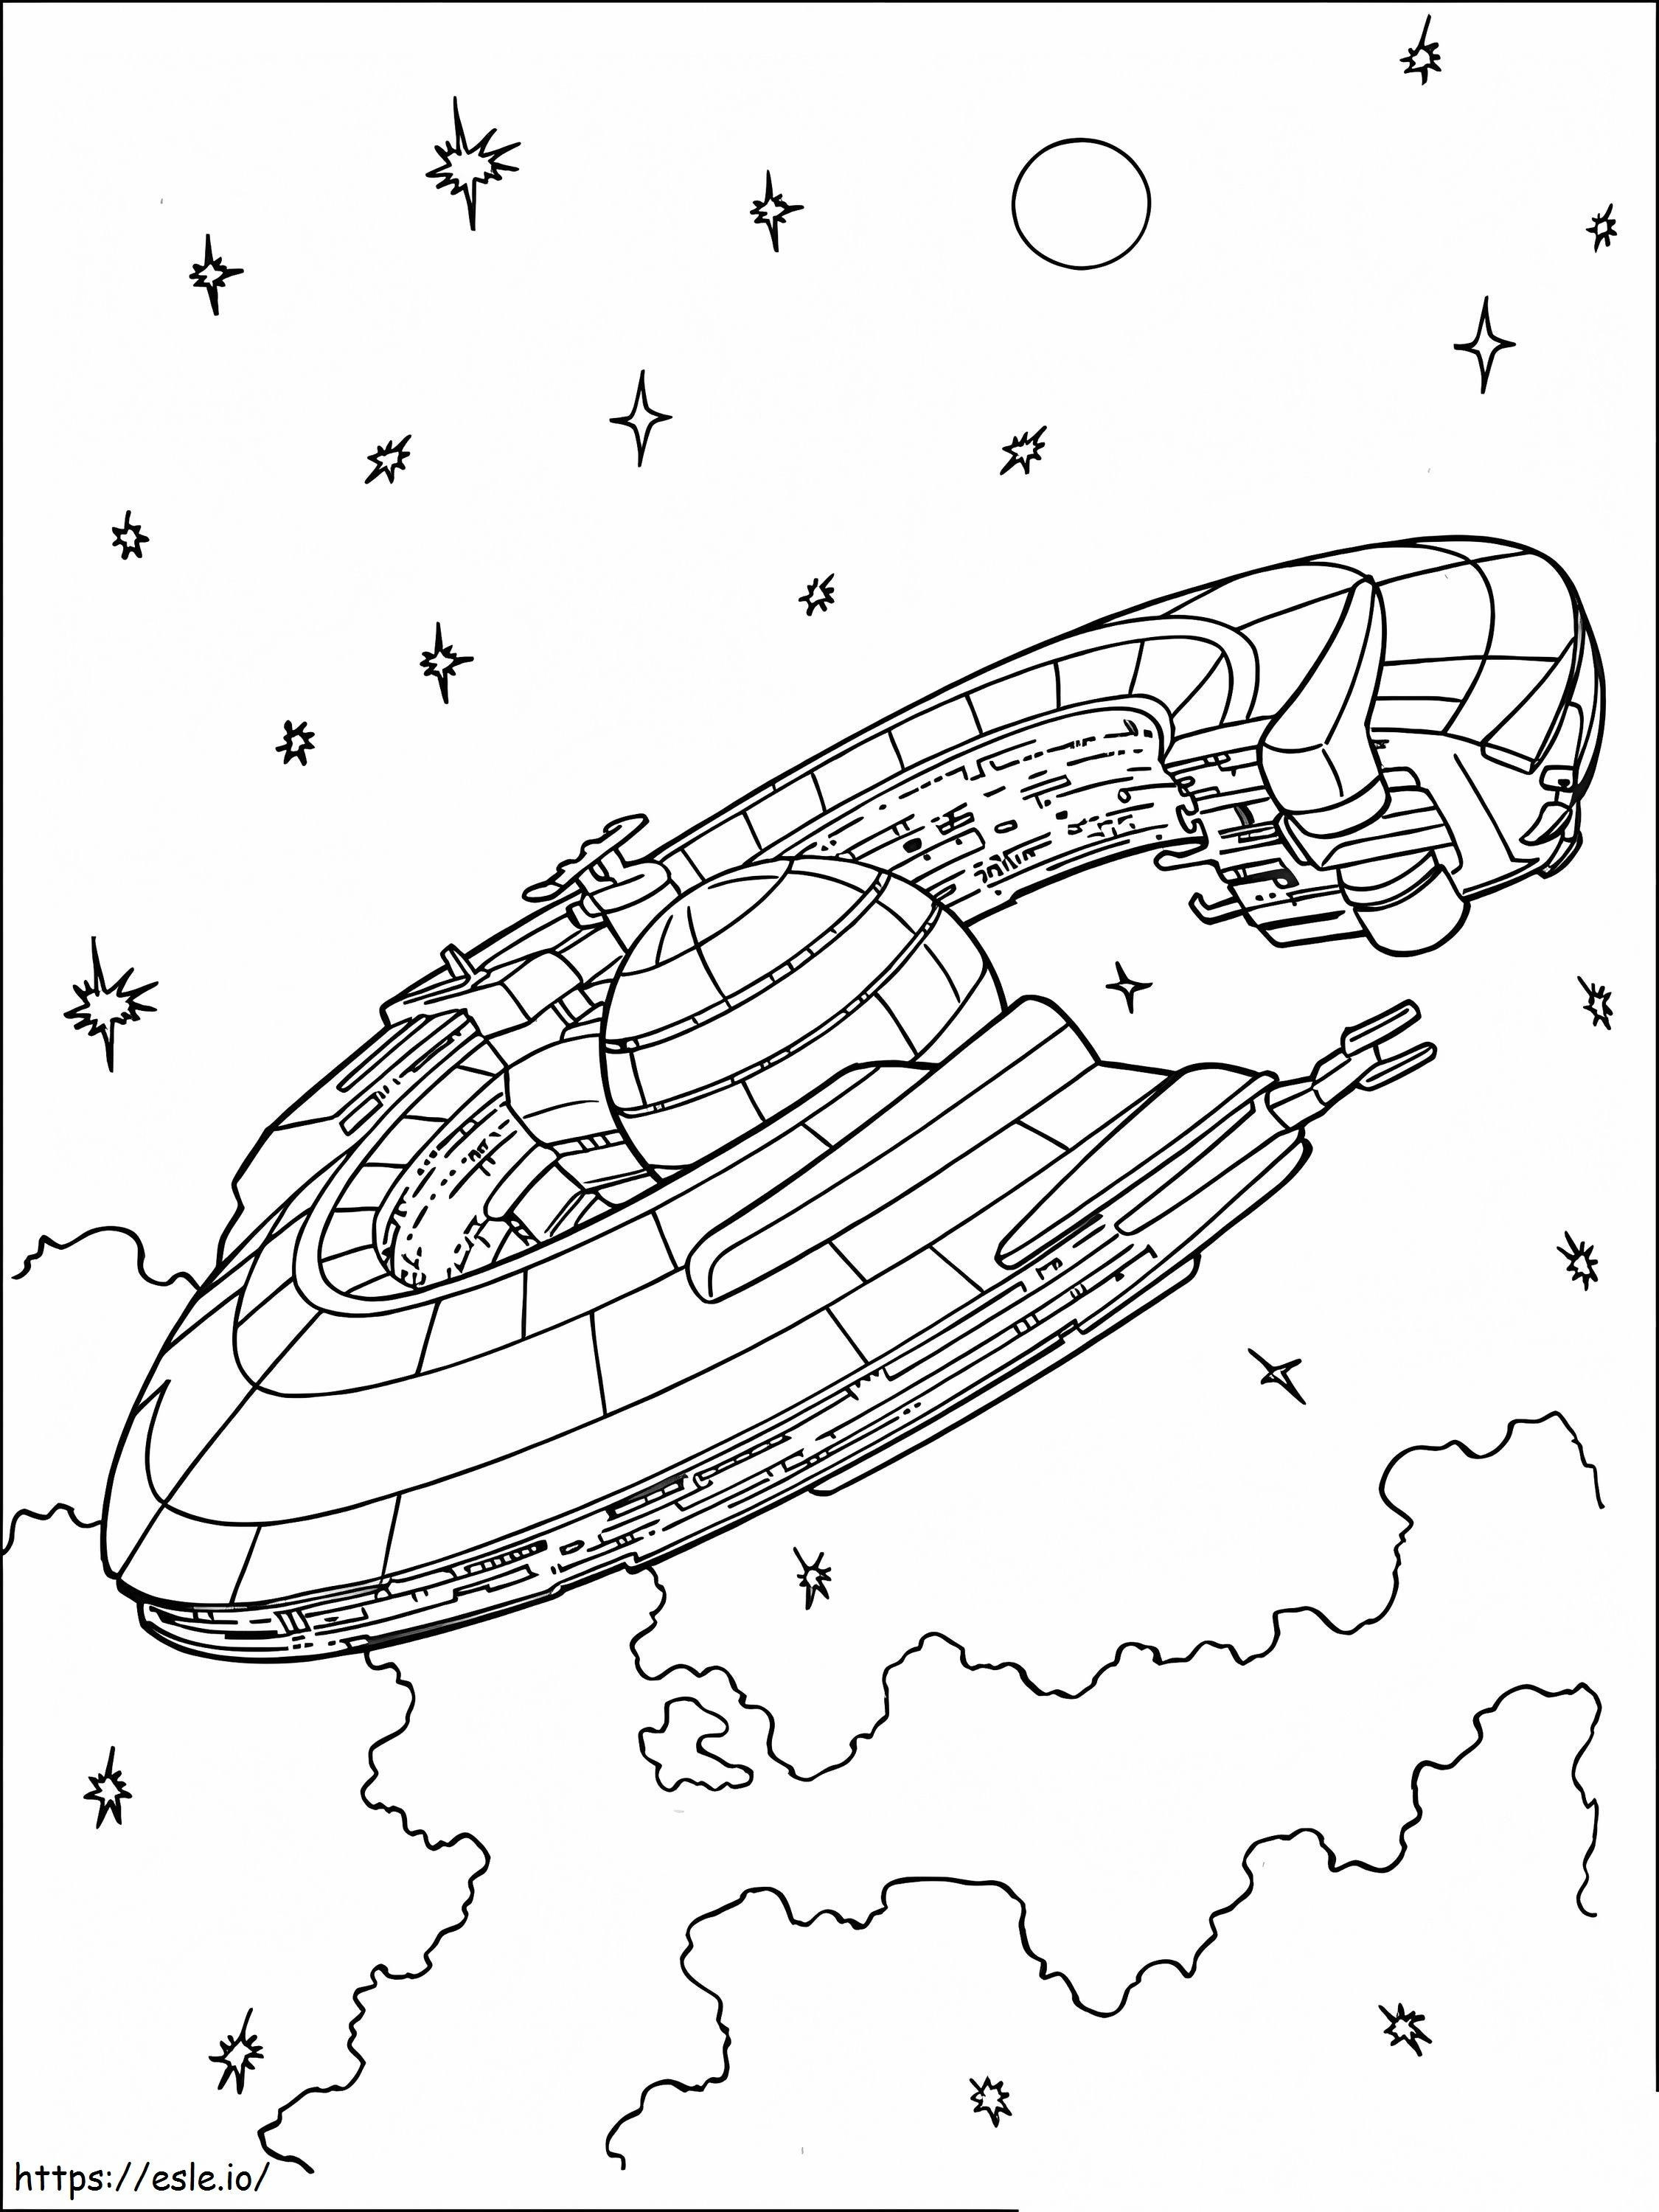 Star Wars 3 coloring page